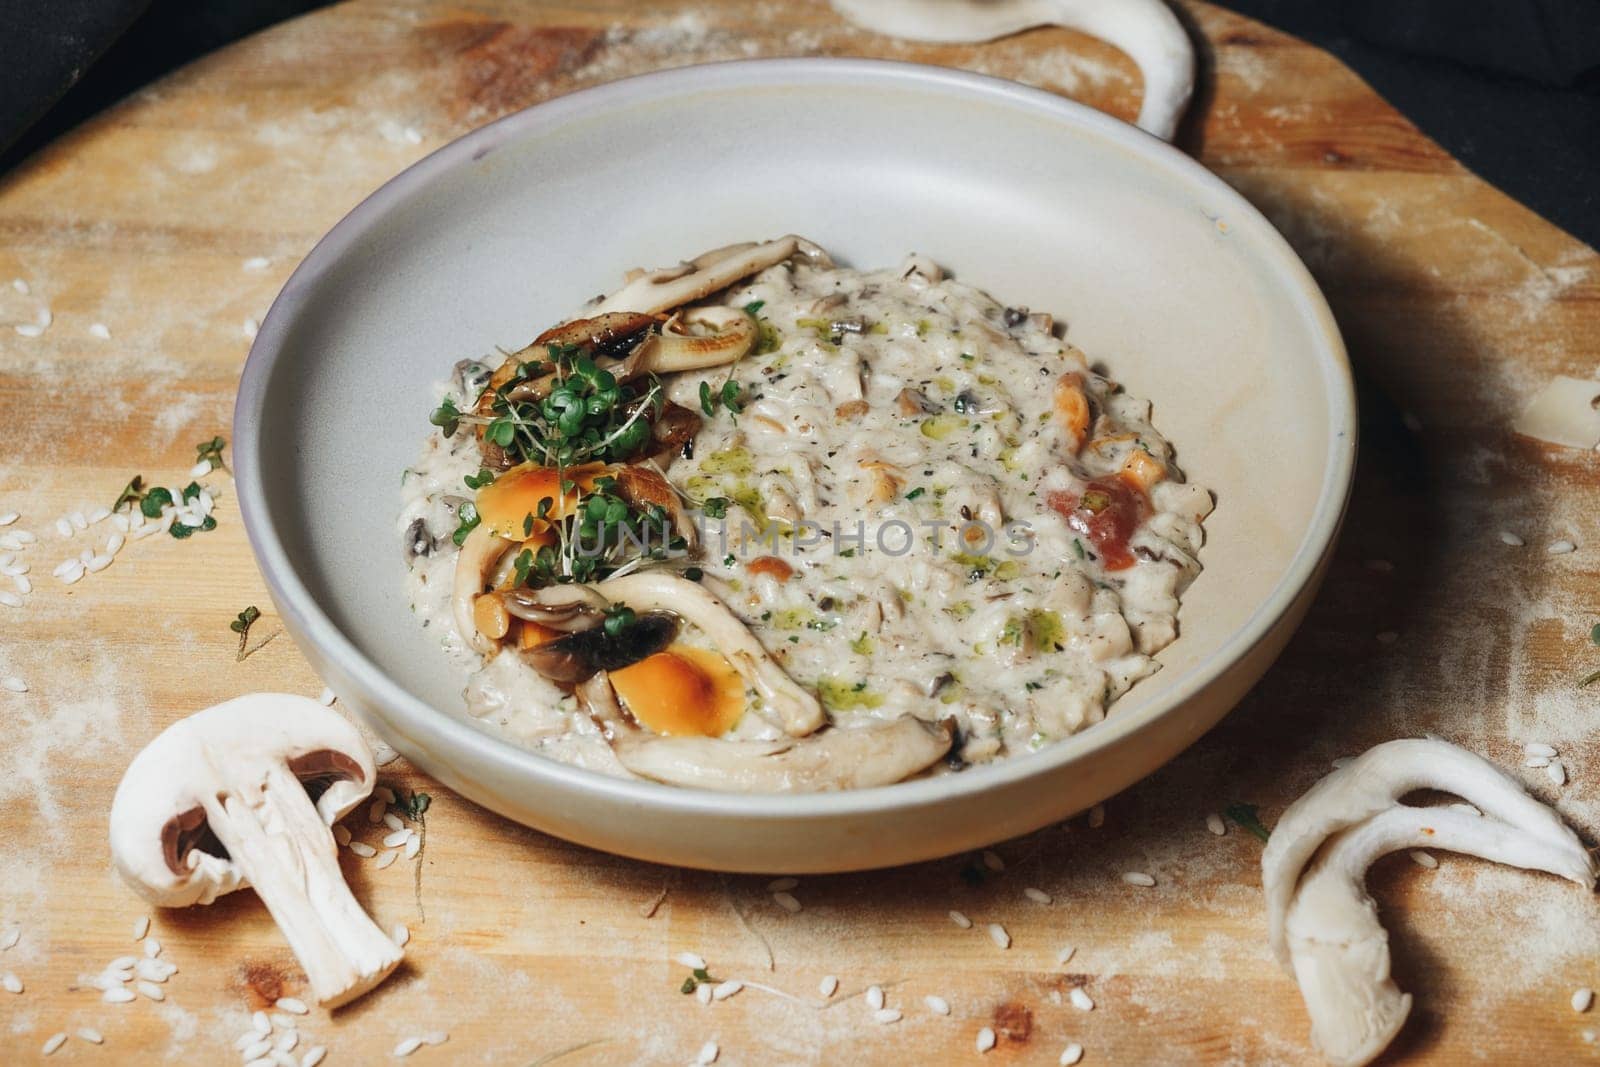 A delicious bowl of mushroom risotto resting on a rustic wooden cutting board.